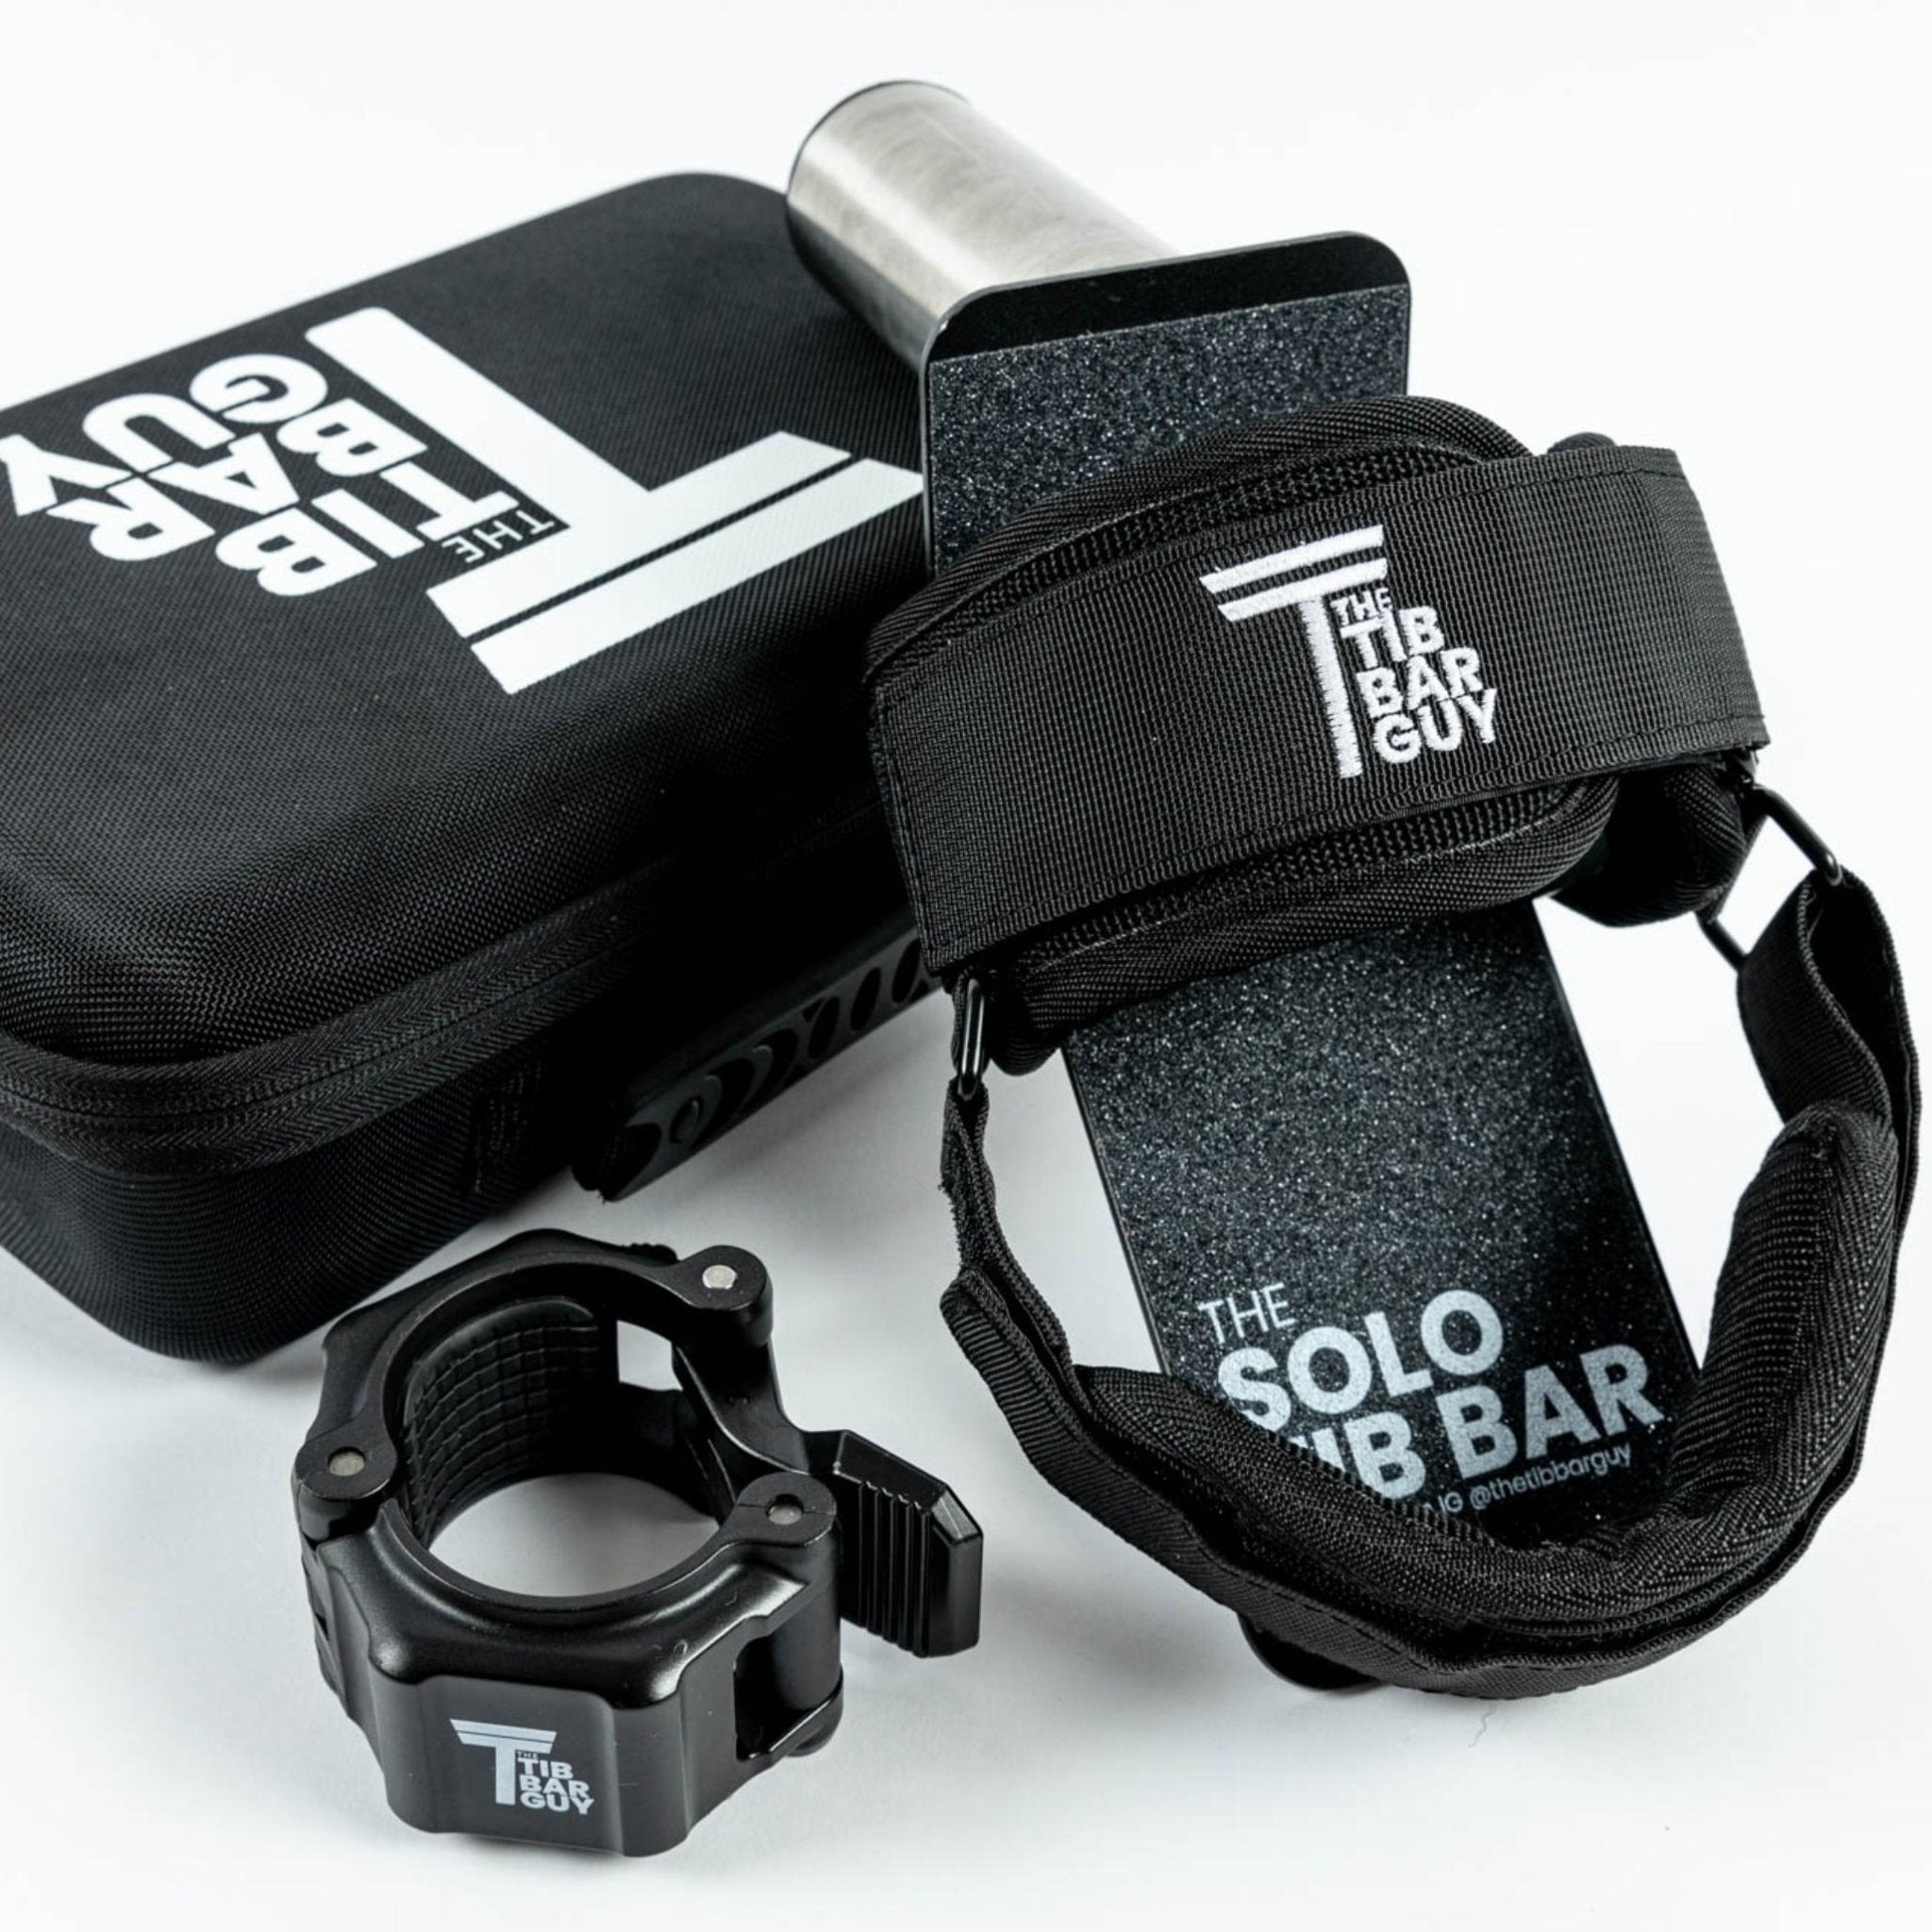 The Solo Tib Bar & Accessories By The Tib Bar Guy